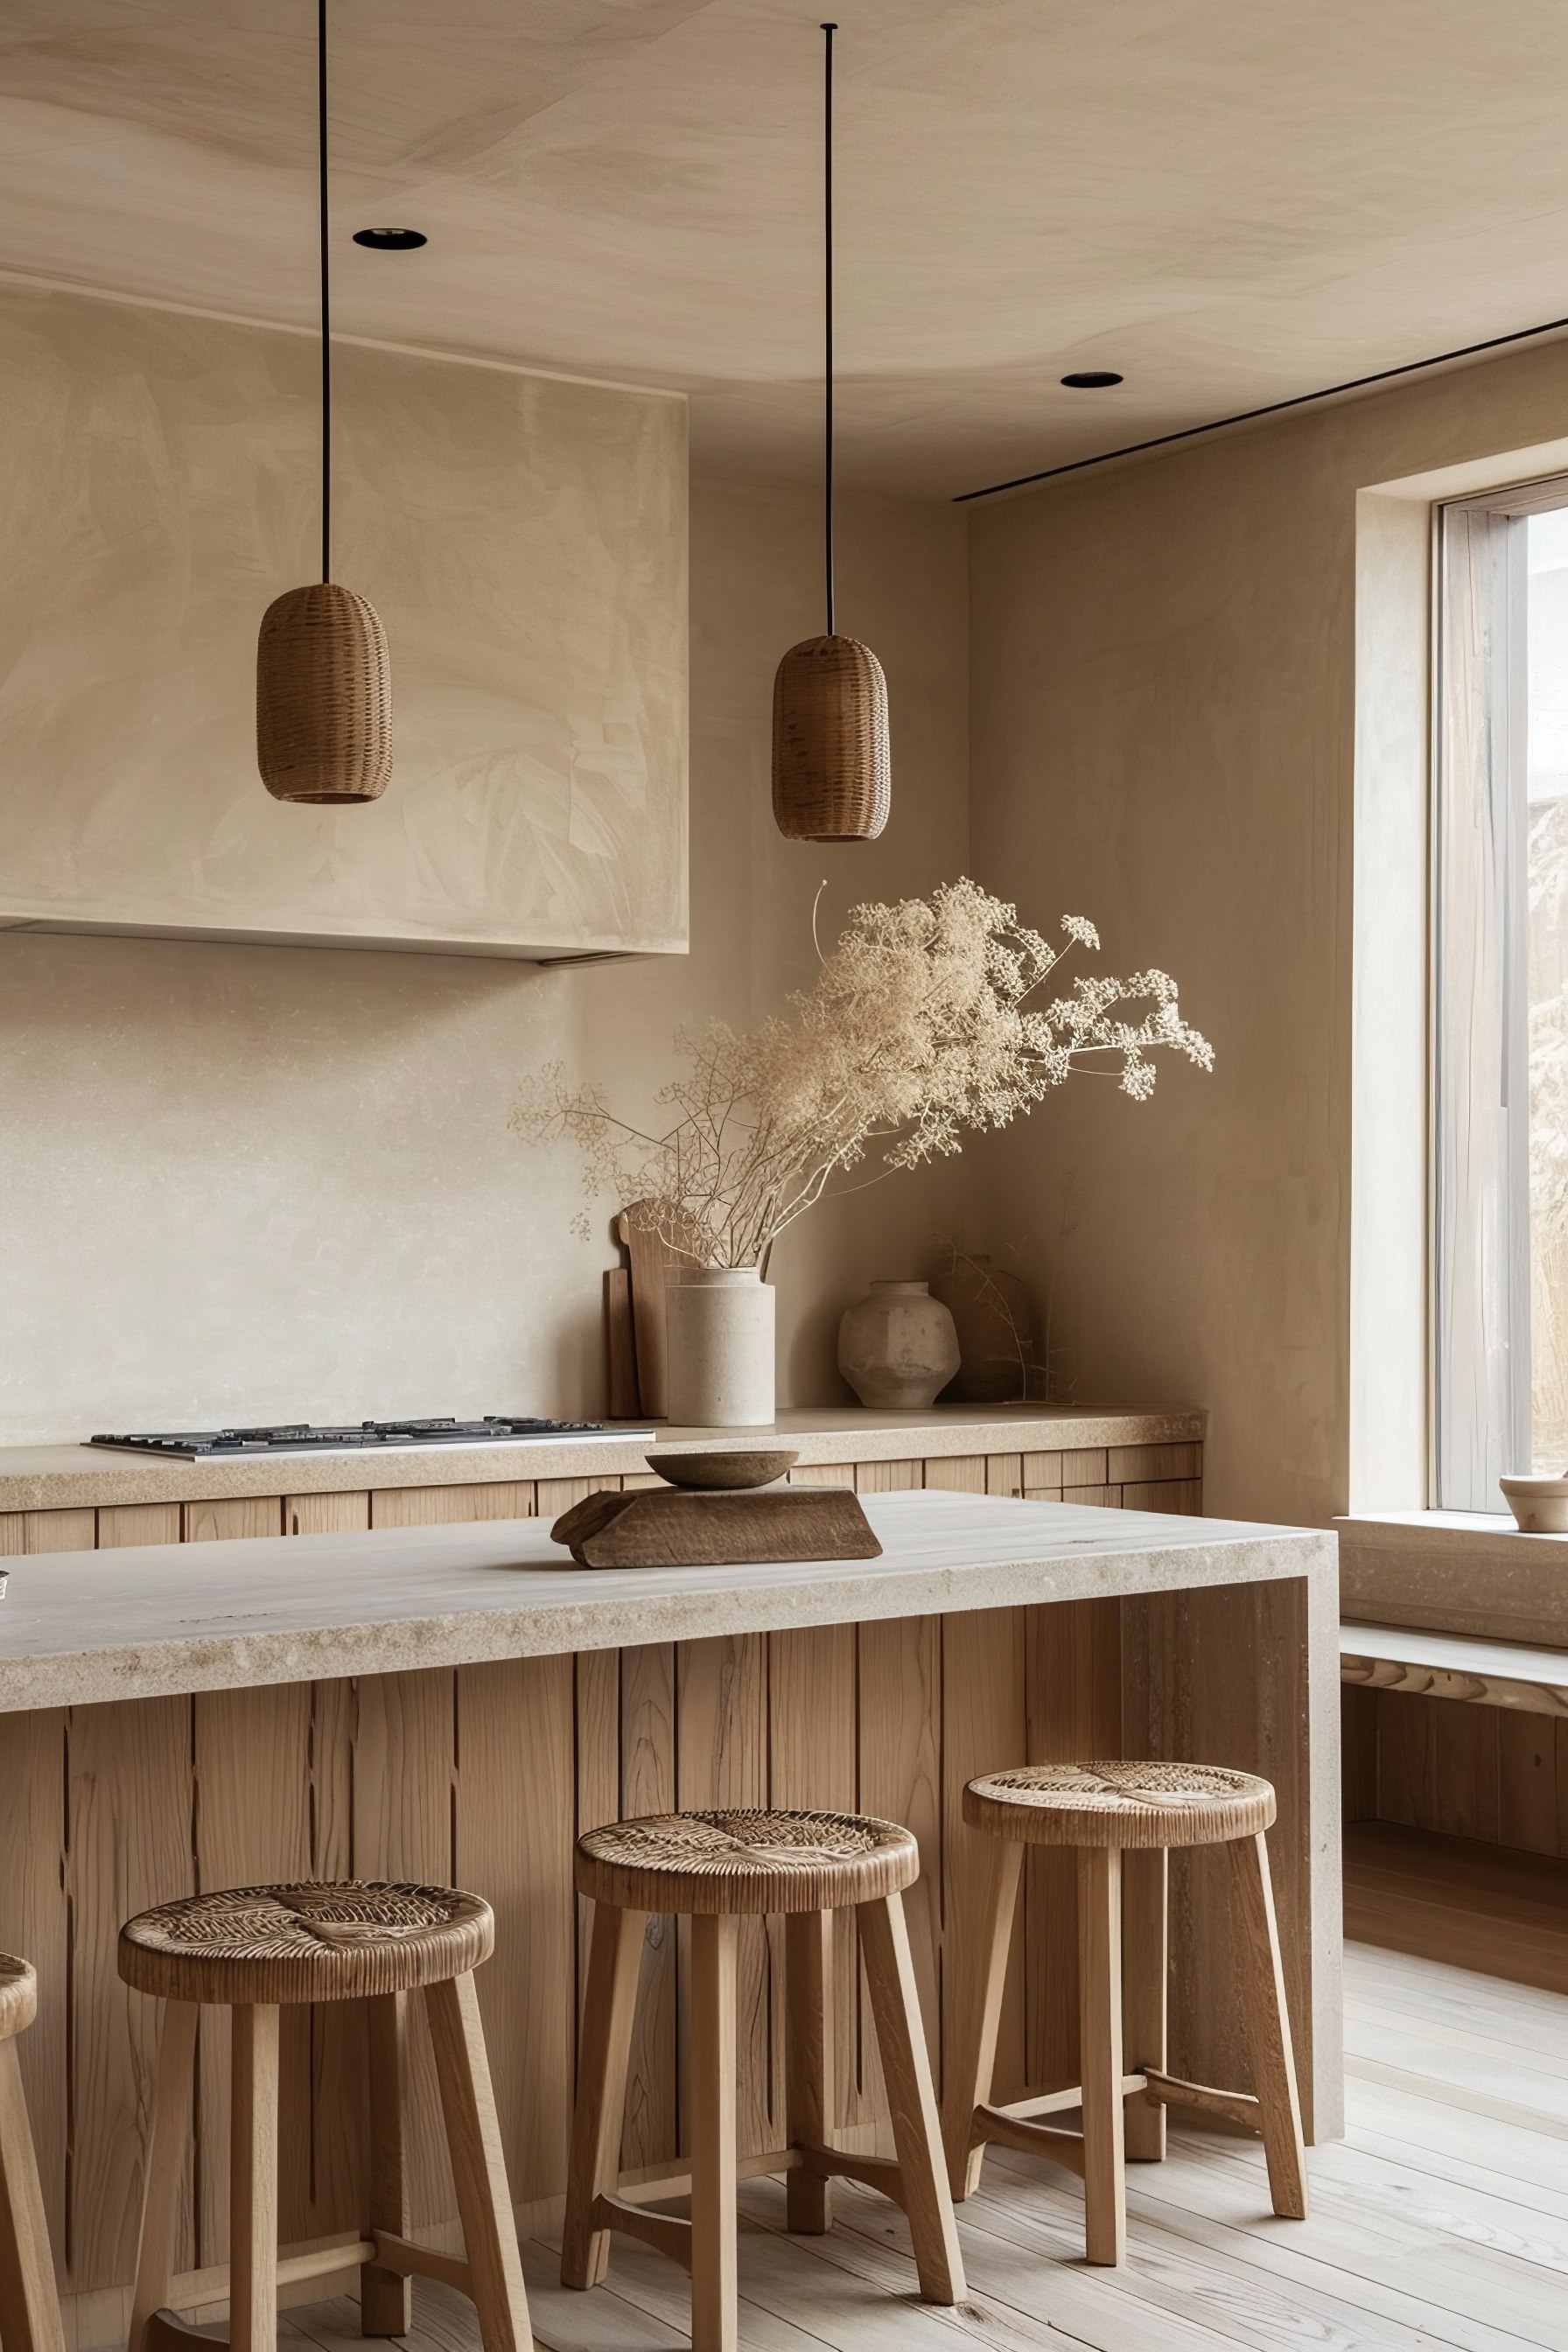 Modern kitchen design with wooden furnishings, rattan pendant lights, wicker stools, and dried plant decor, evoking a warm, natural aesthetic.